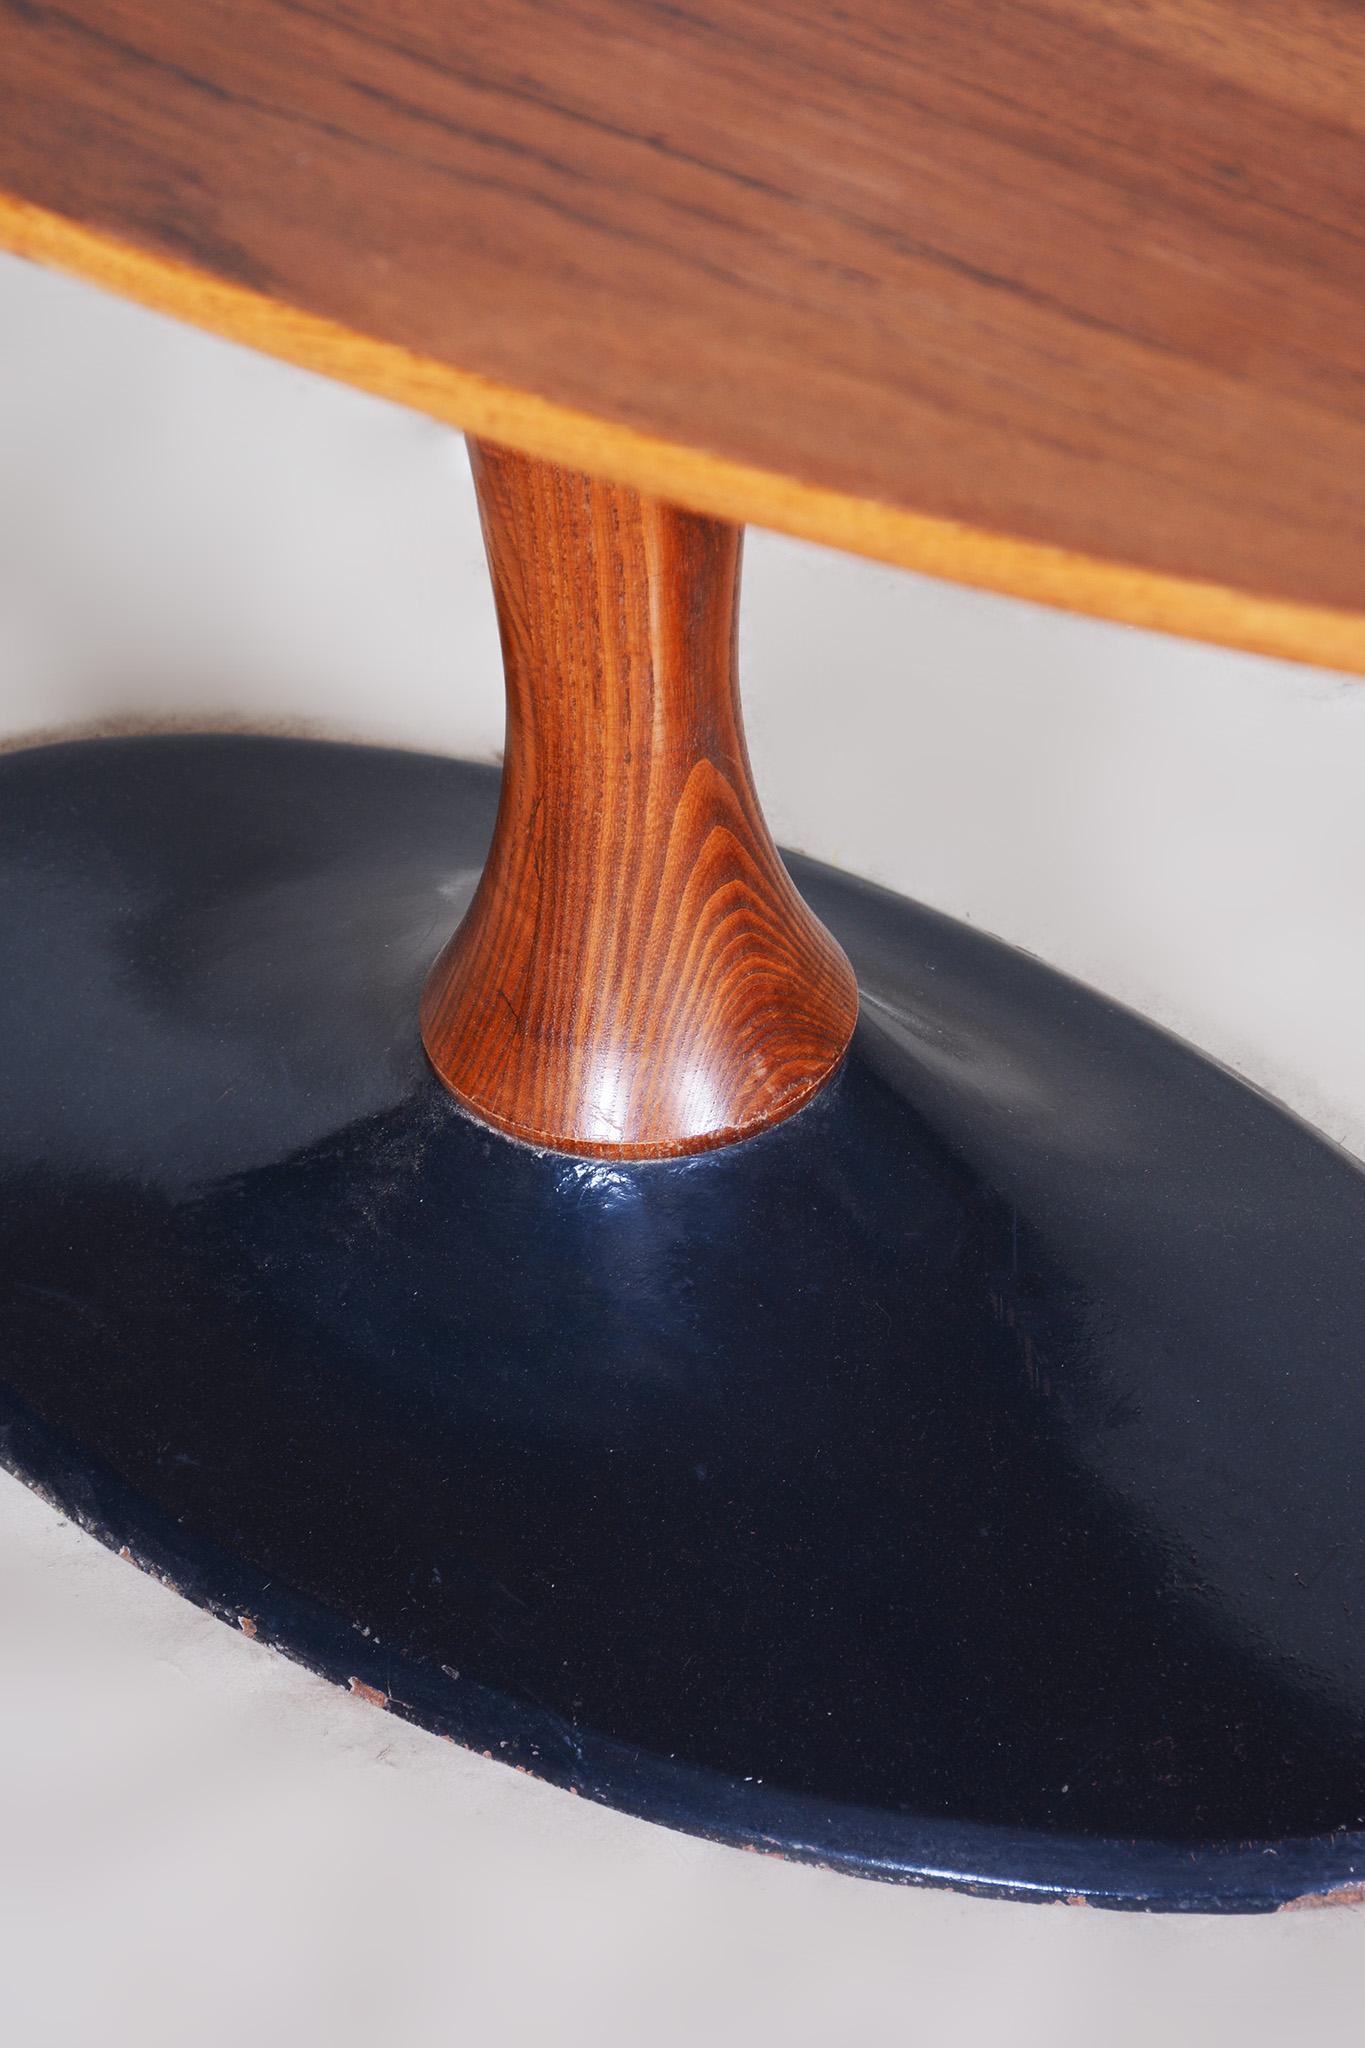 Czech Mid-Century Rosewood Oval Table with Cast Iron Base, 1950s For Sale 4